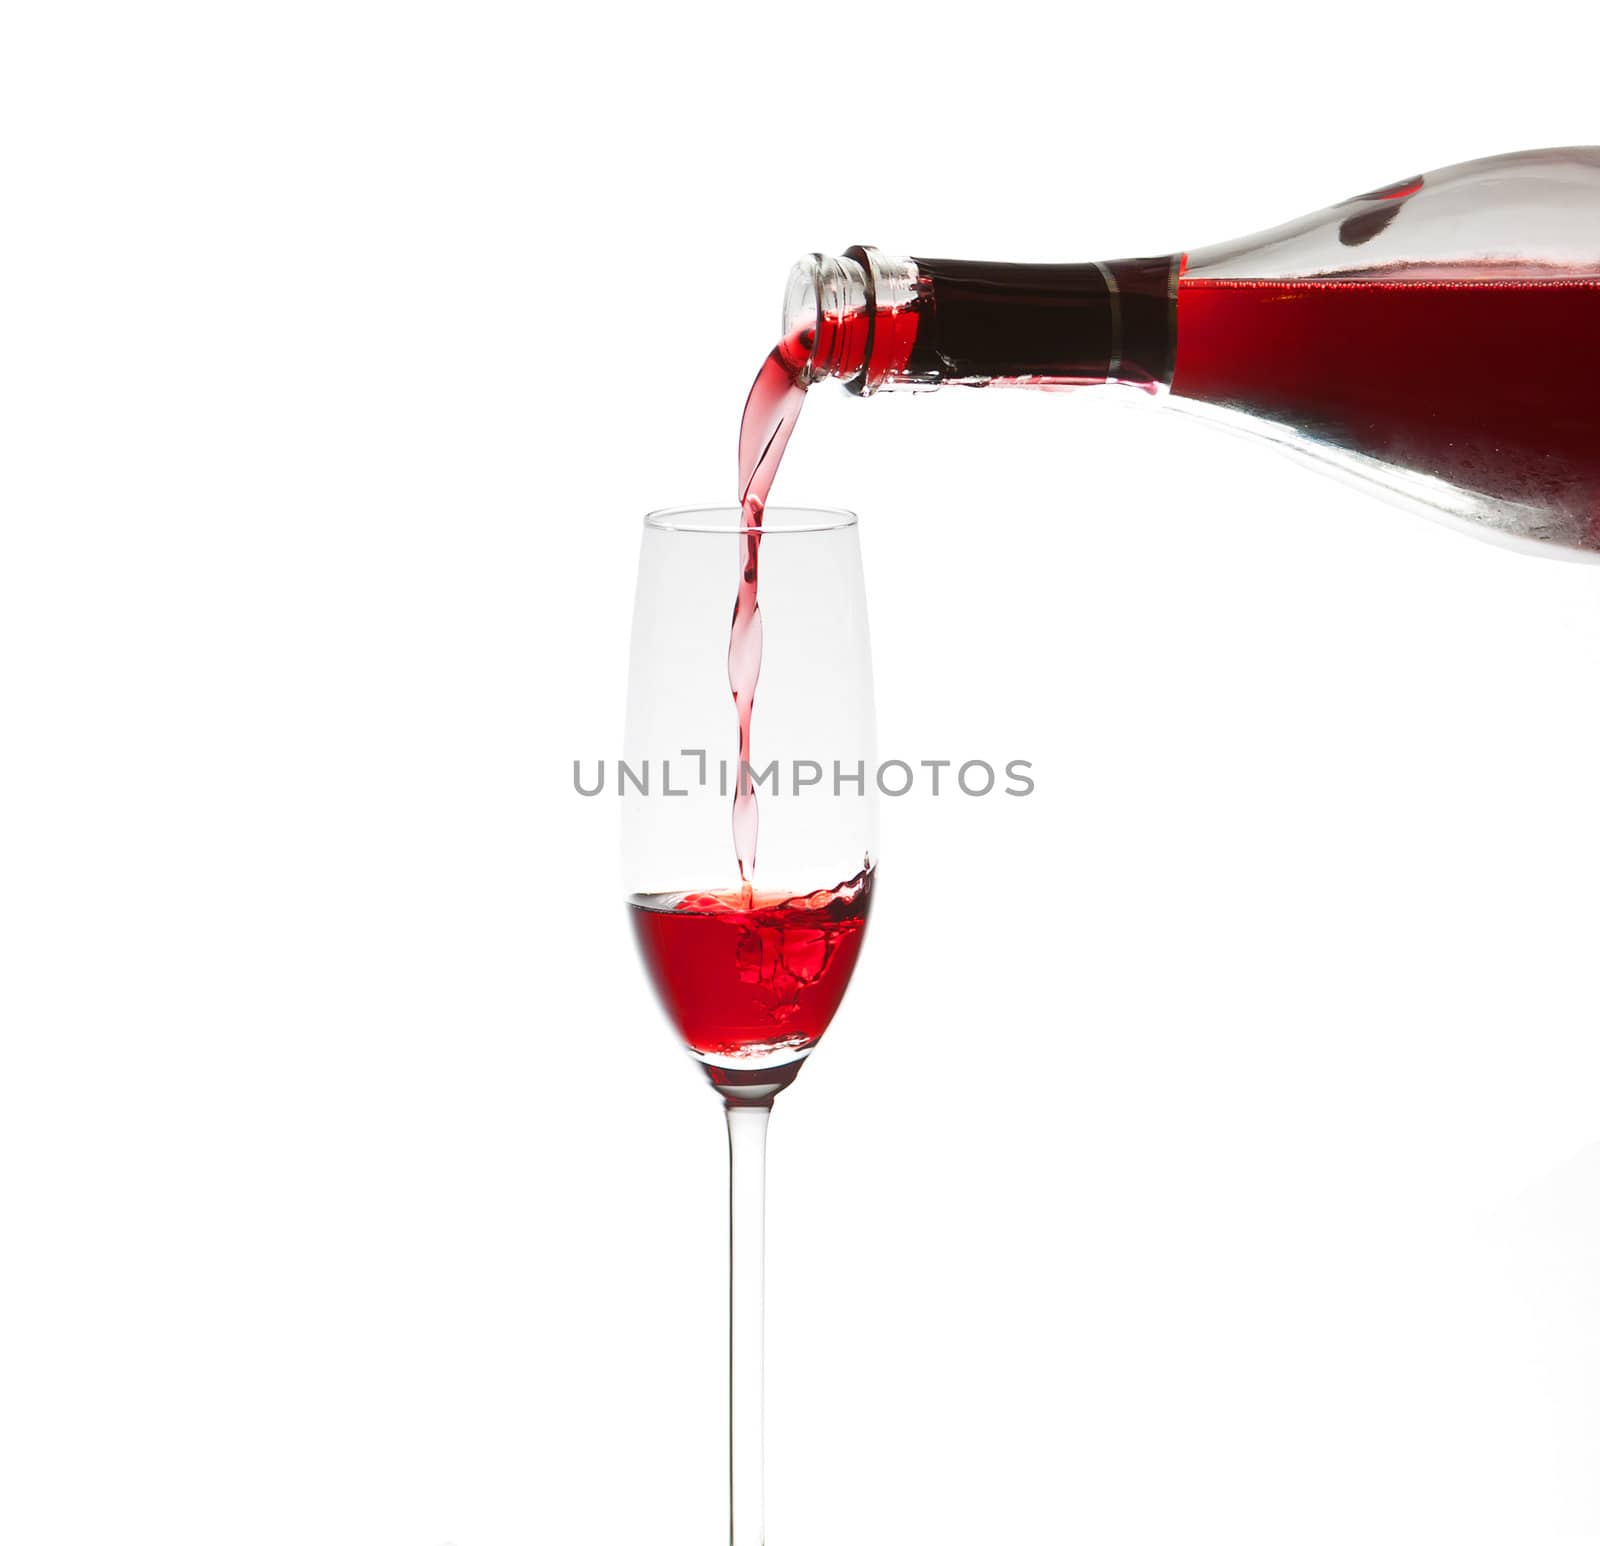 Pouring a glass of wine, close-up